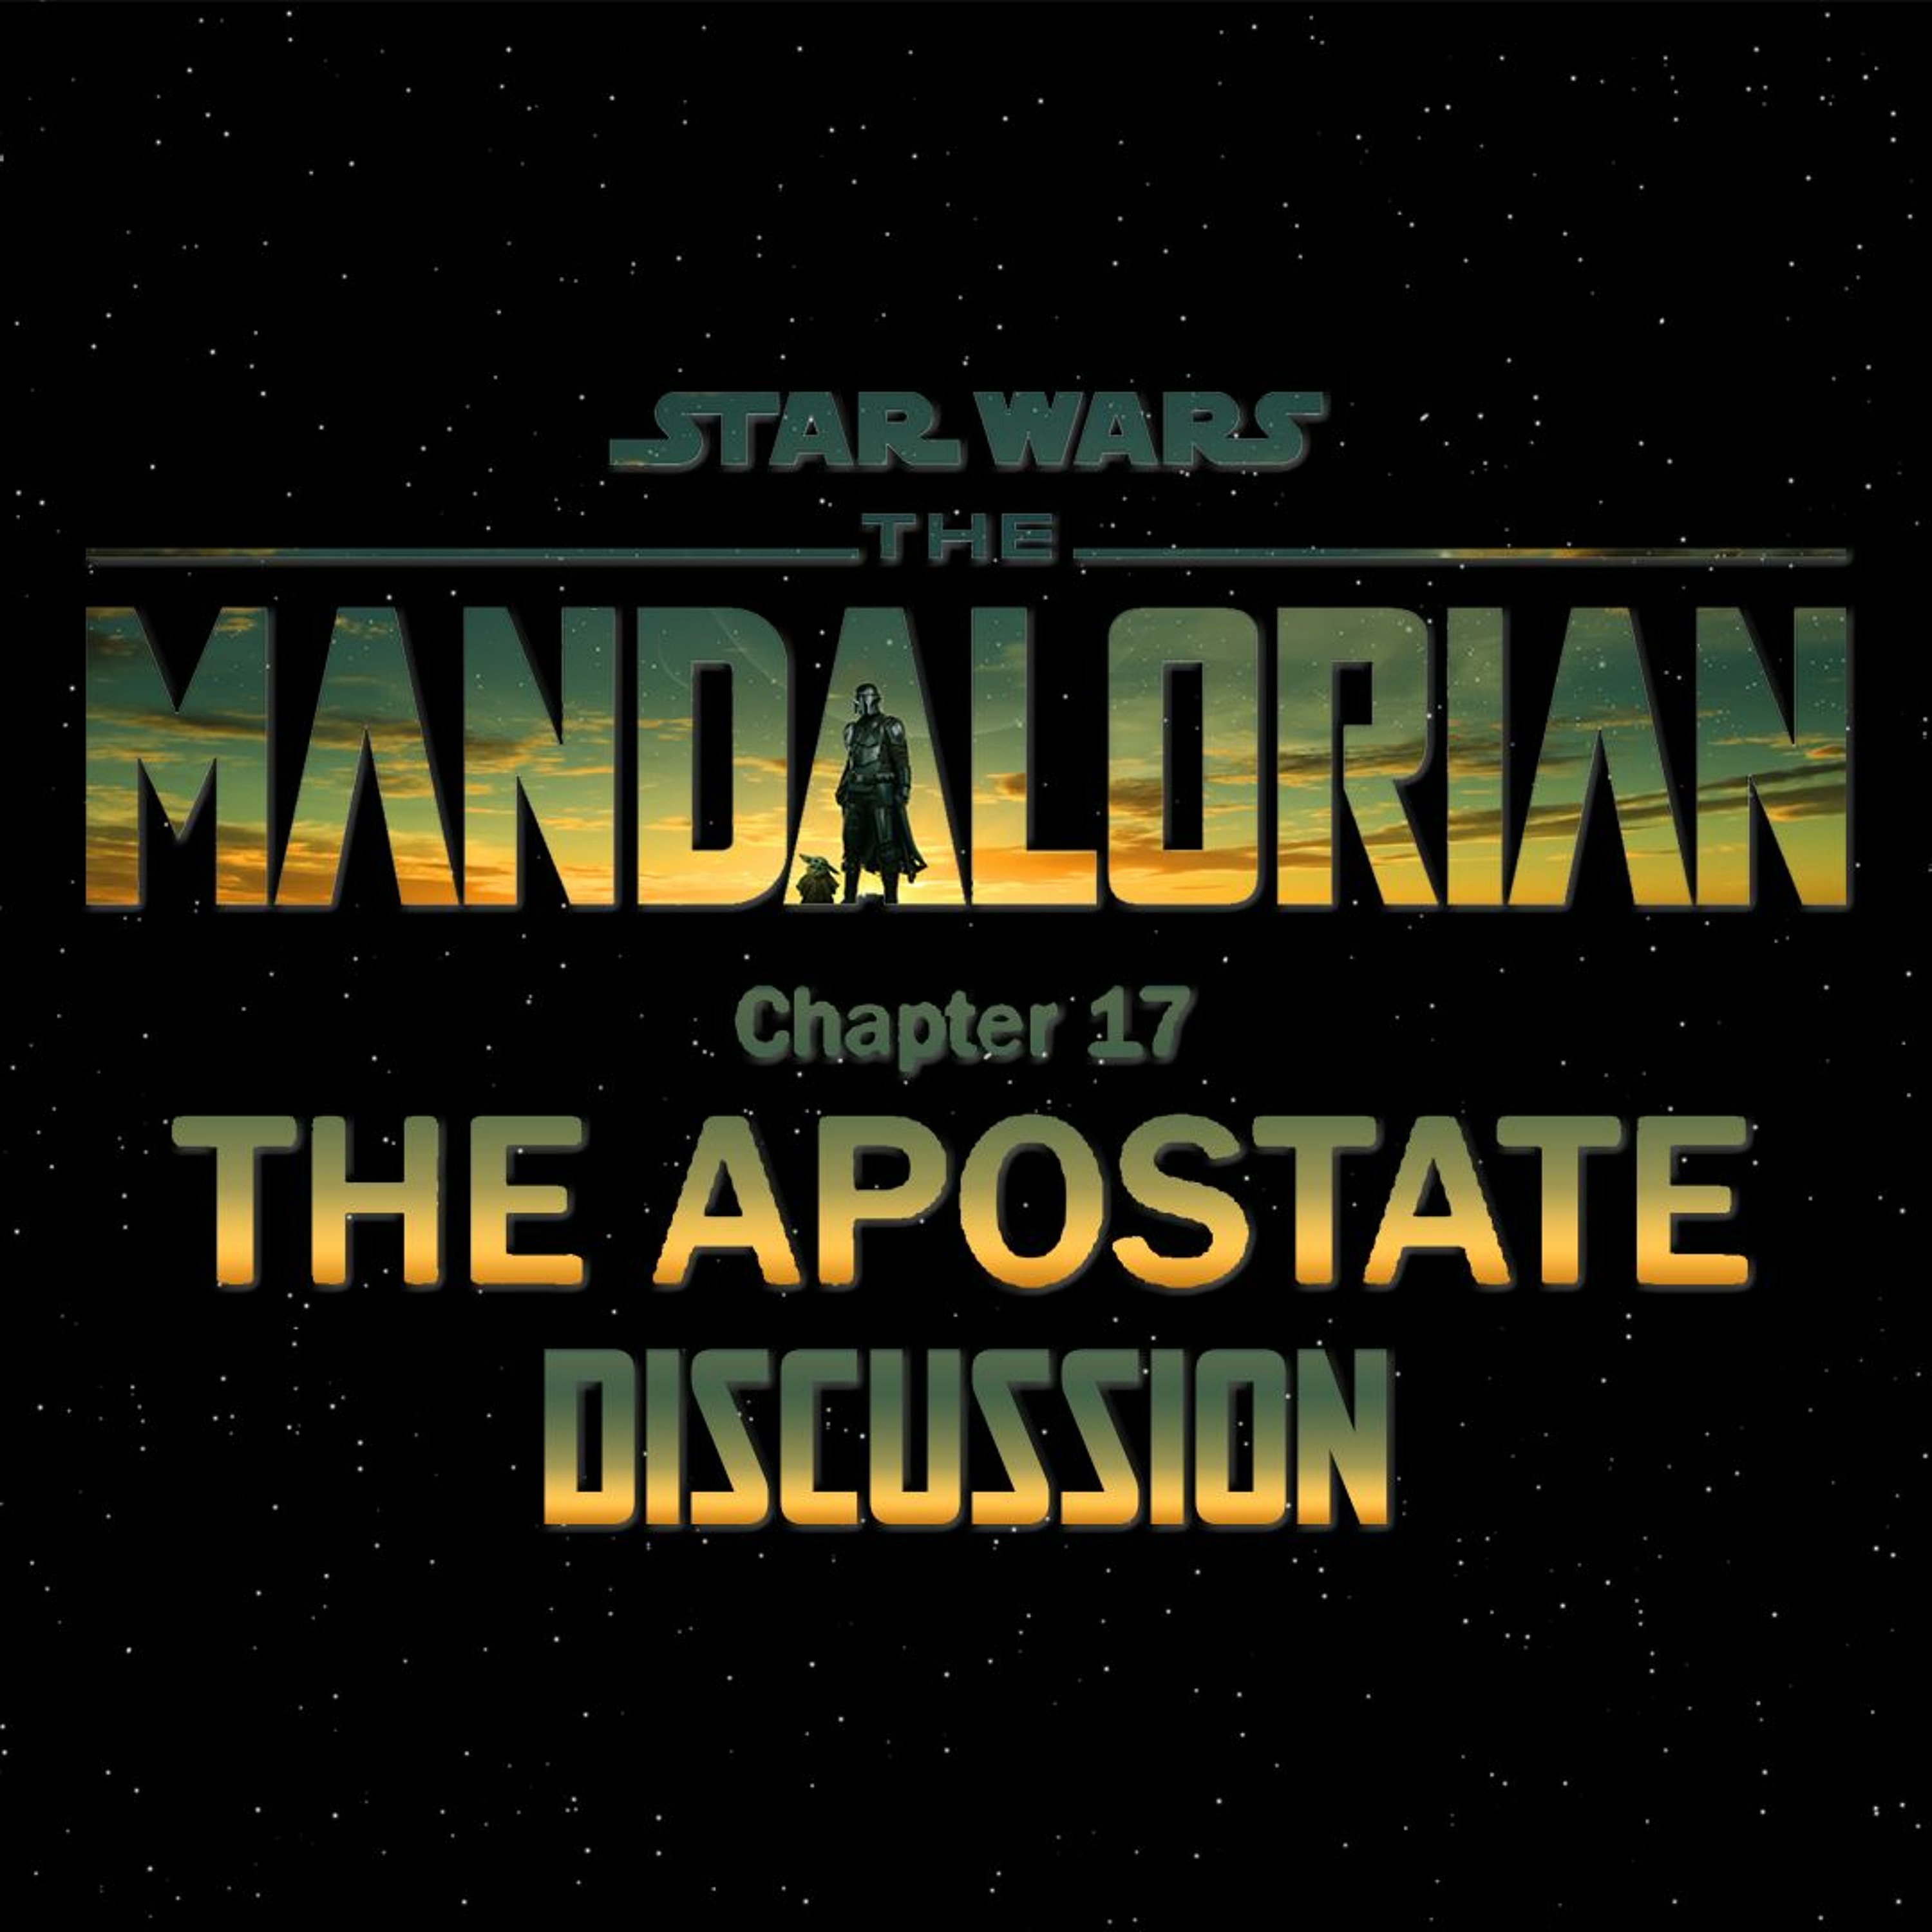 The Mandalorian Chapter 17: The Apostate